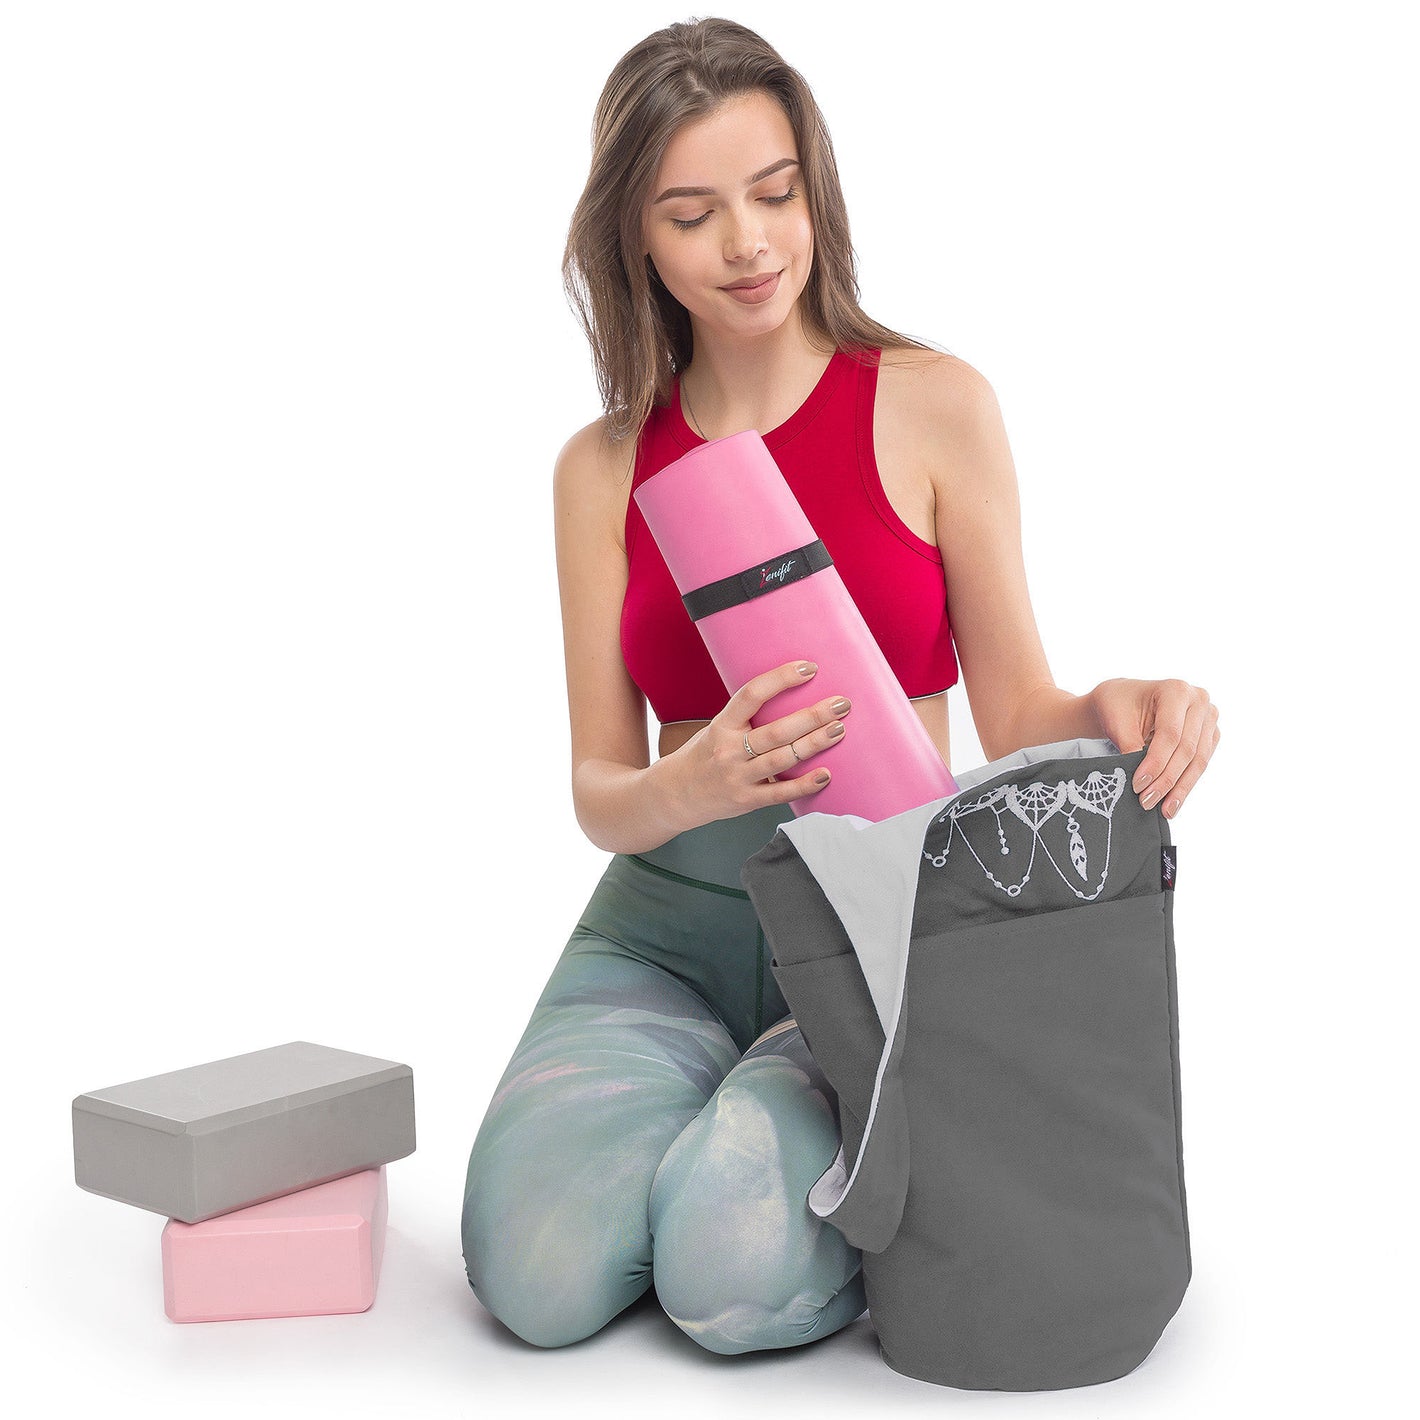 women putting yoga mat in th yoga bag on her knees with yoga blocks next to her